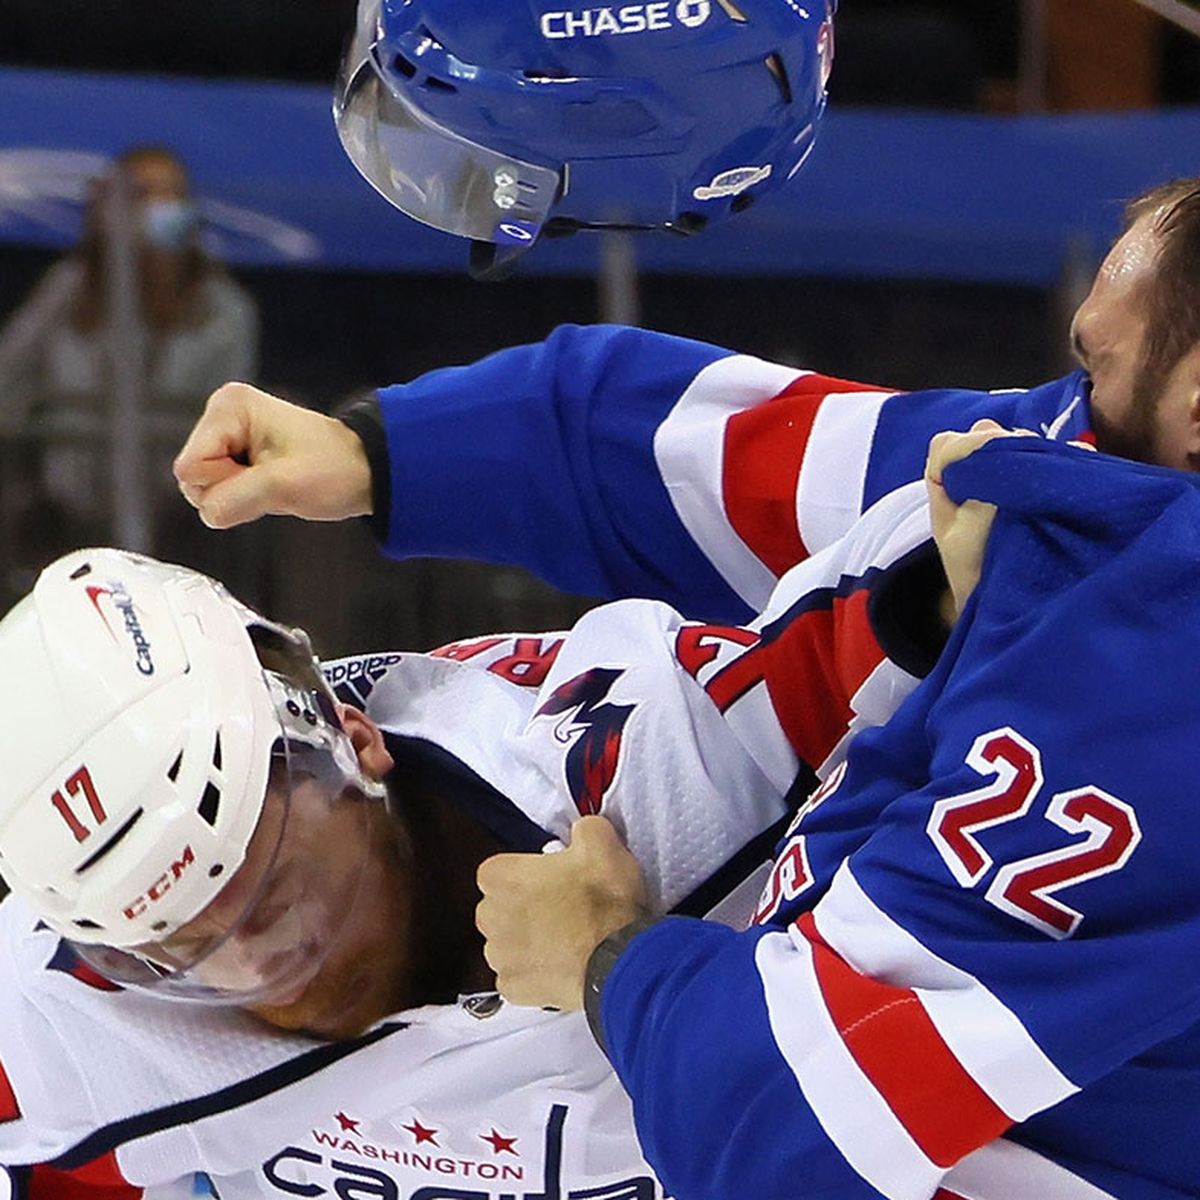 Rangers: Parros unfit to lead NHL's Department of Player Safety